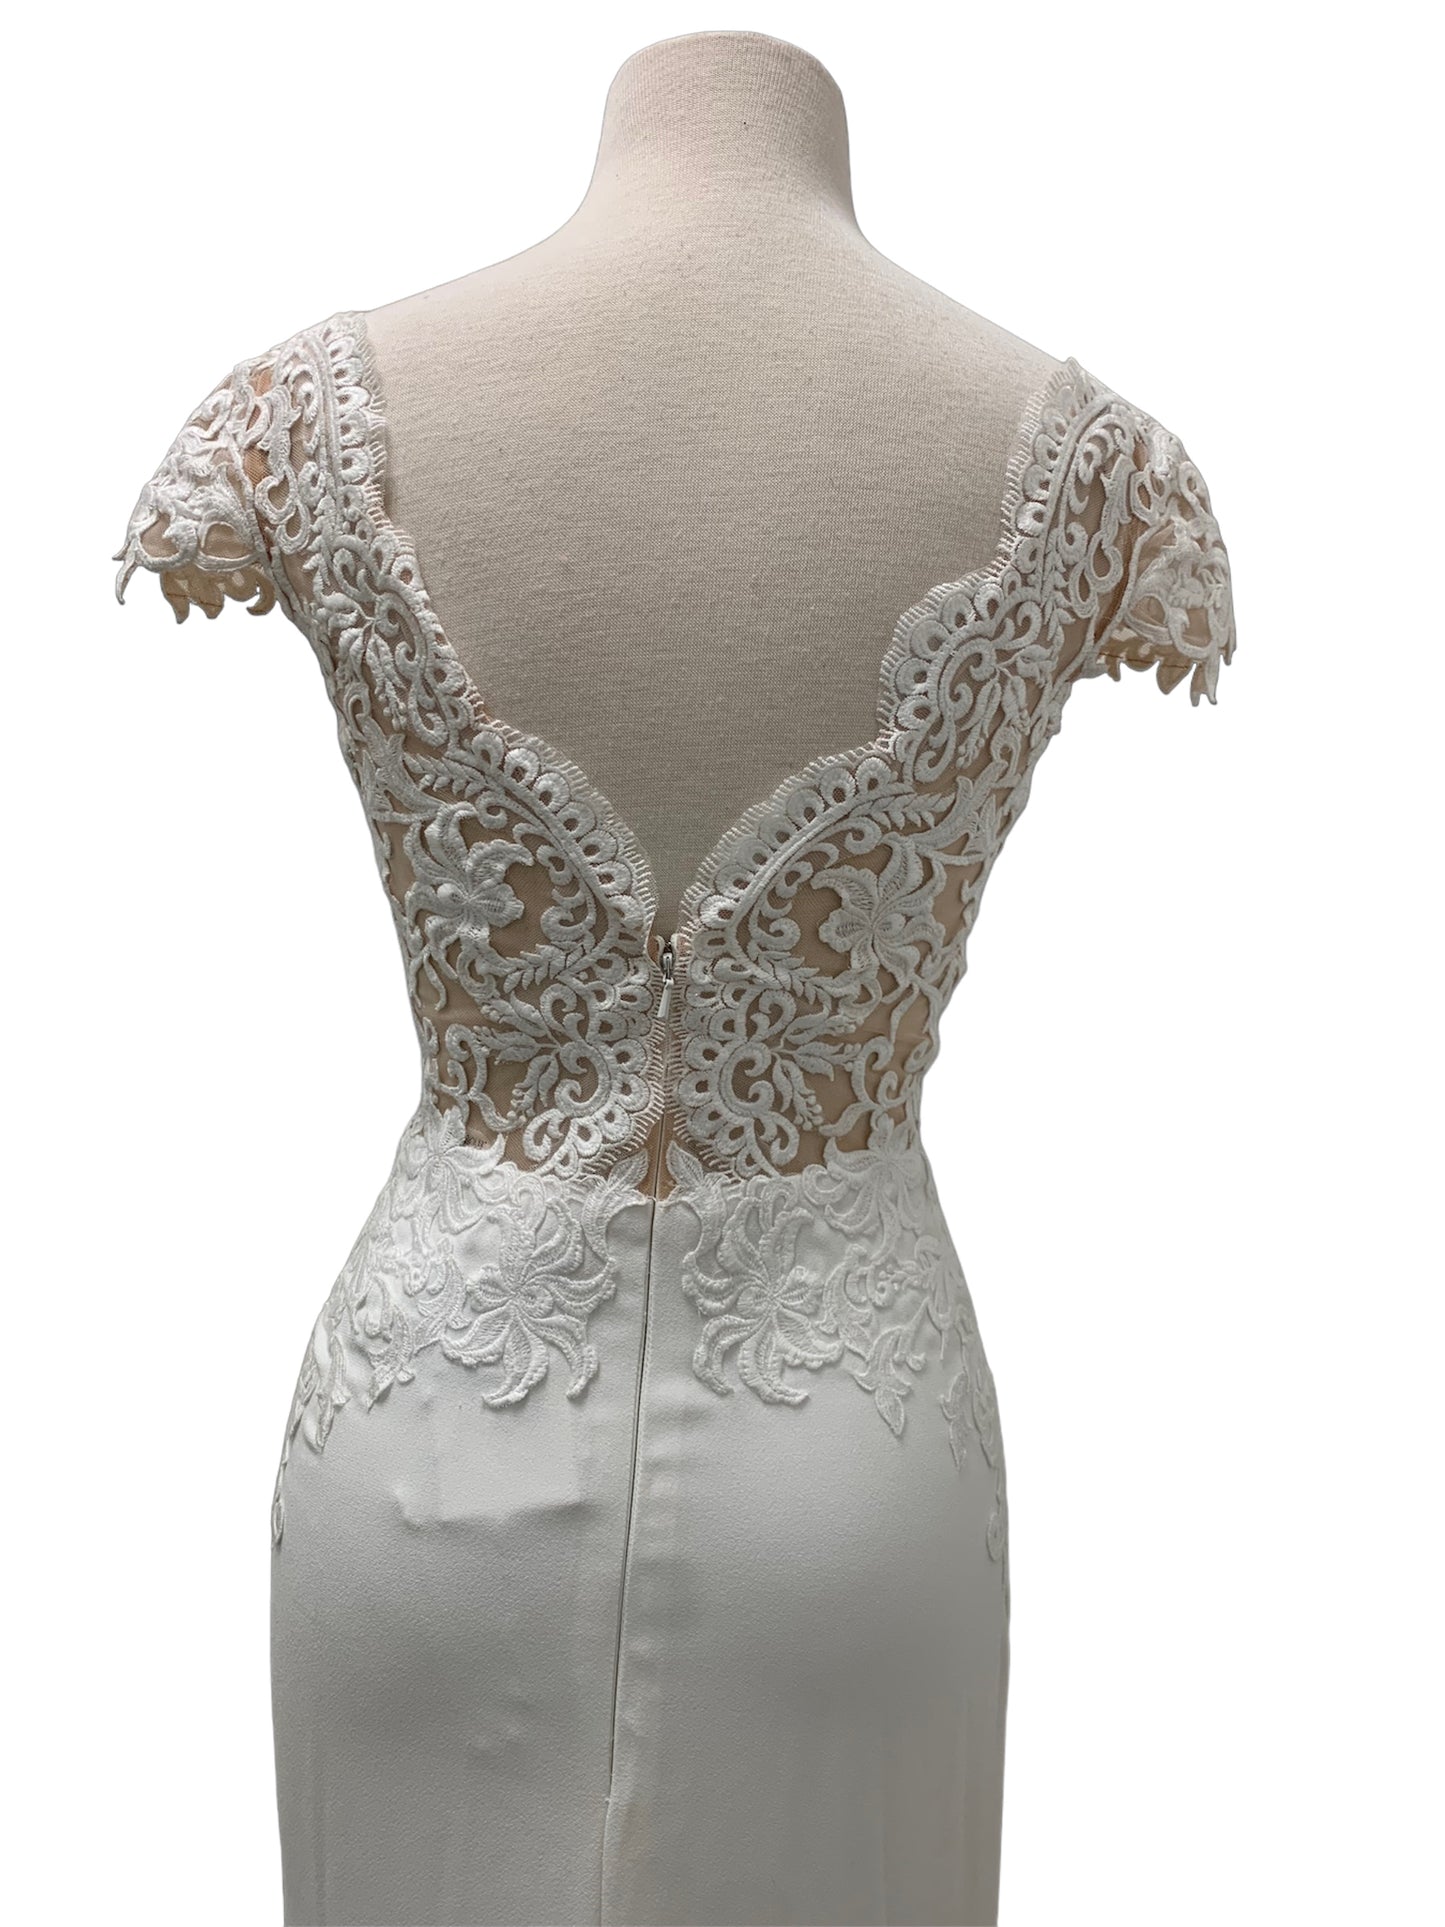 LAMOUR CALLA BLANCHE SIZE 6 Wedding Gown